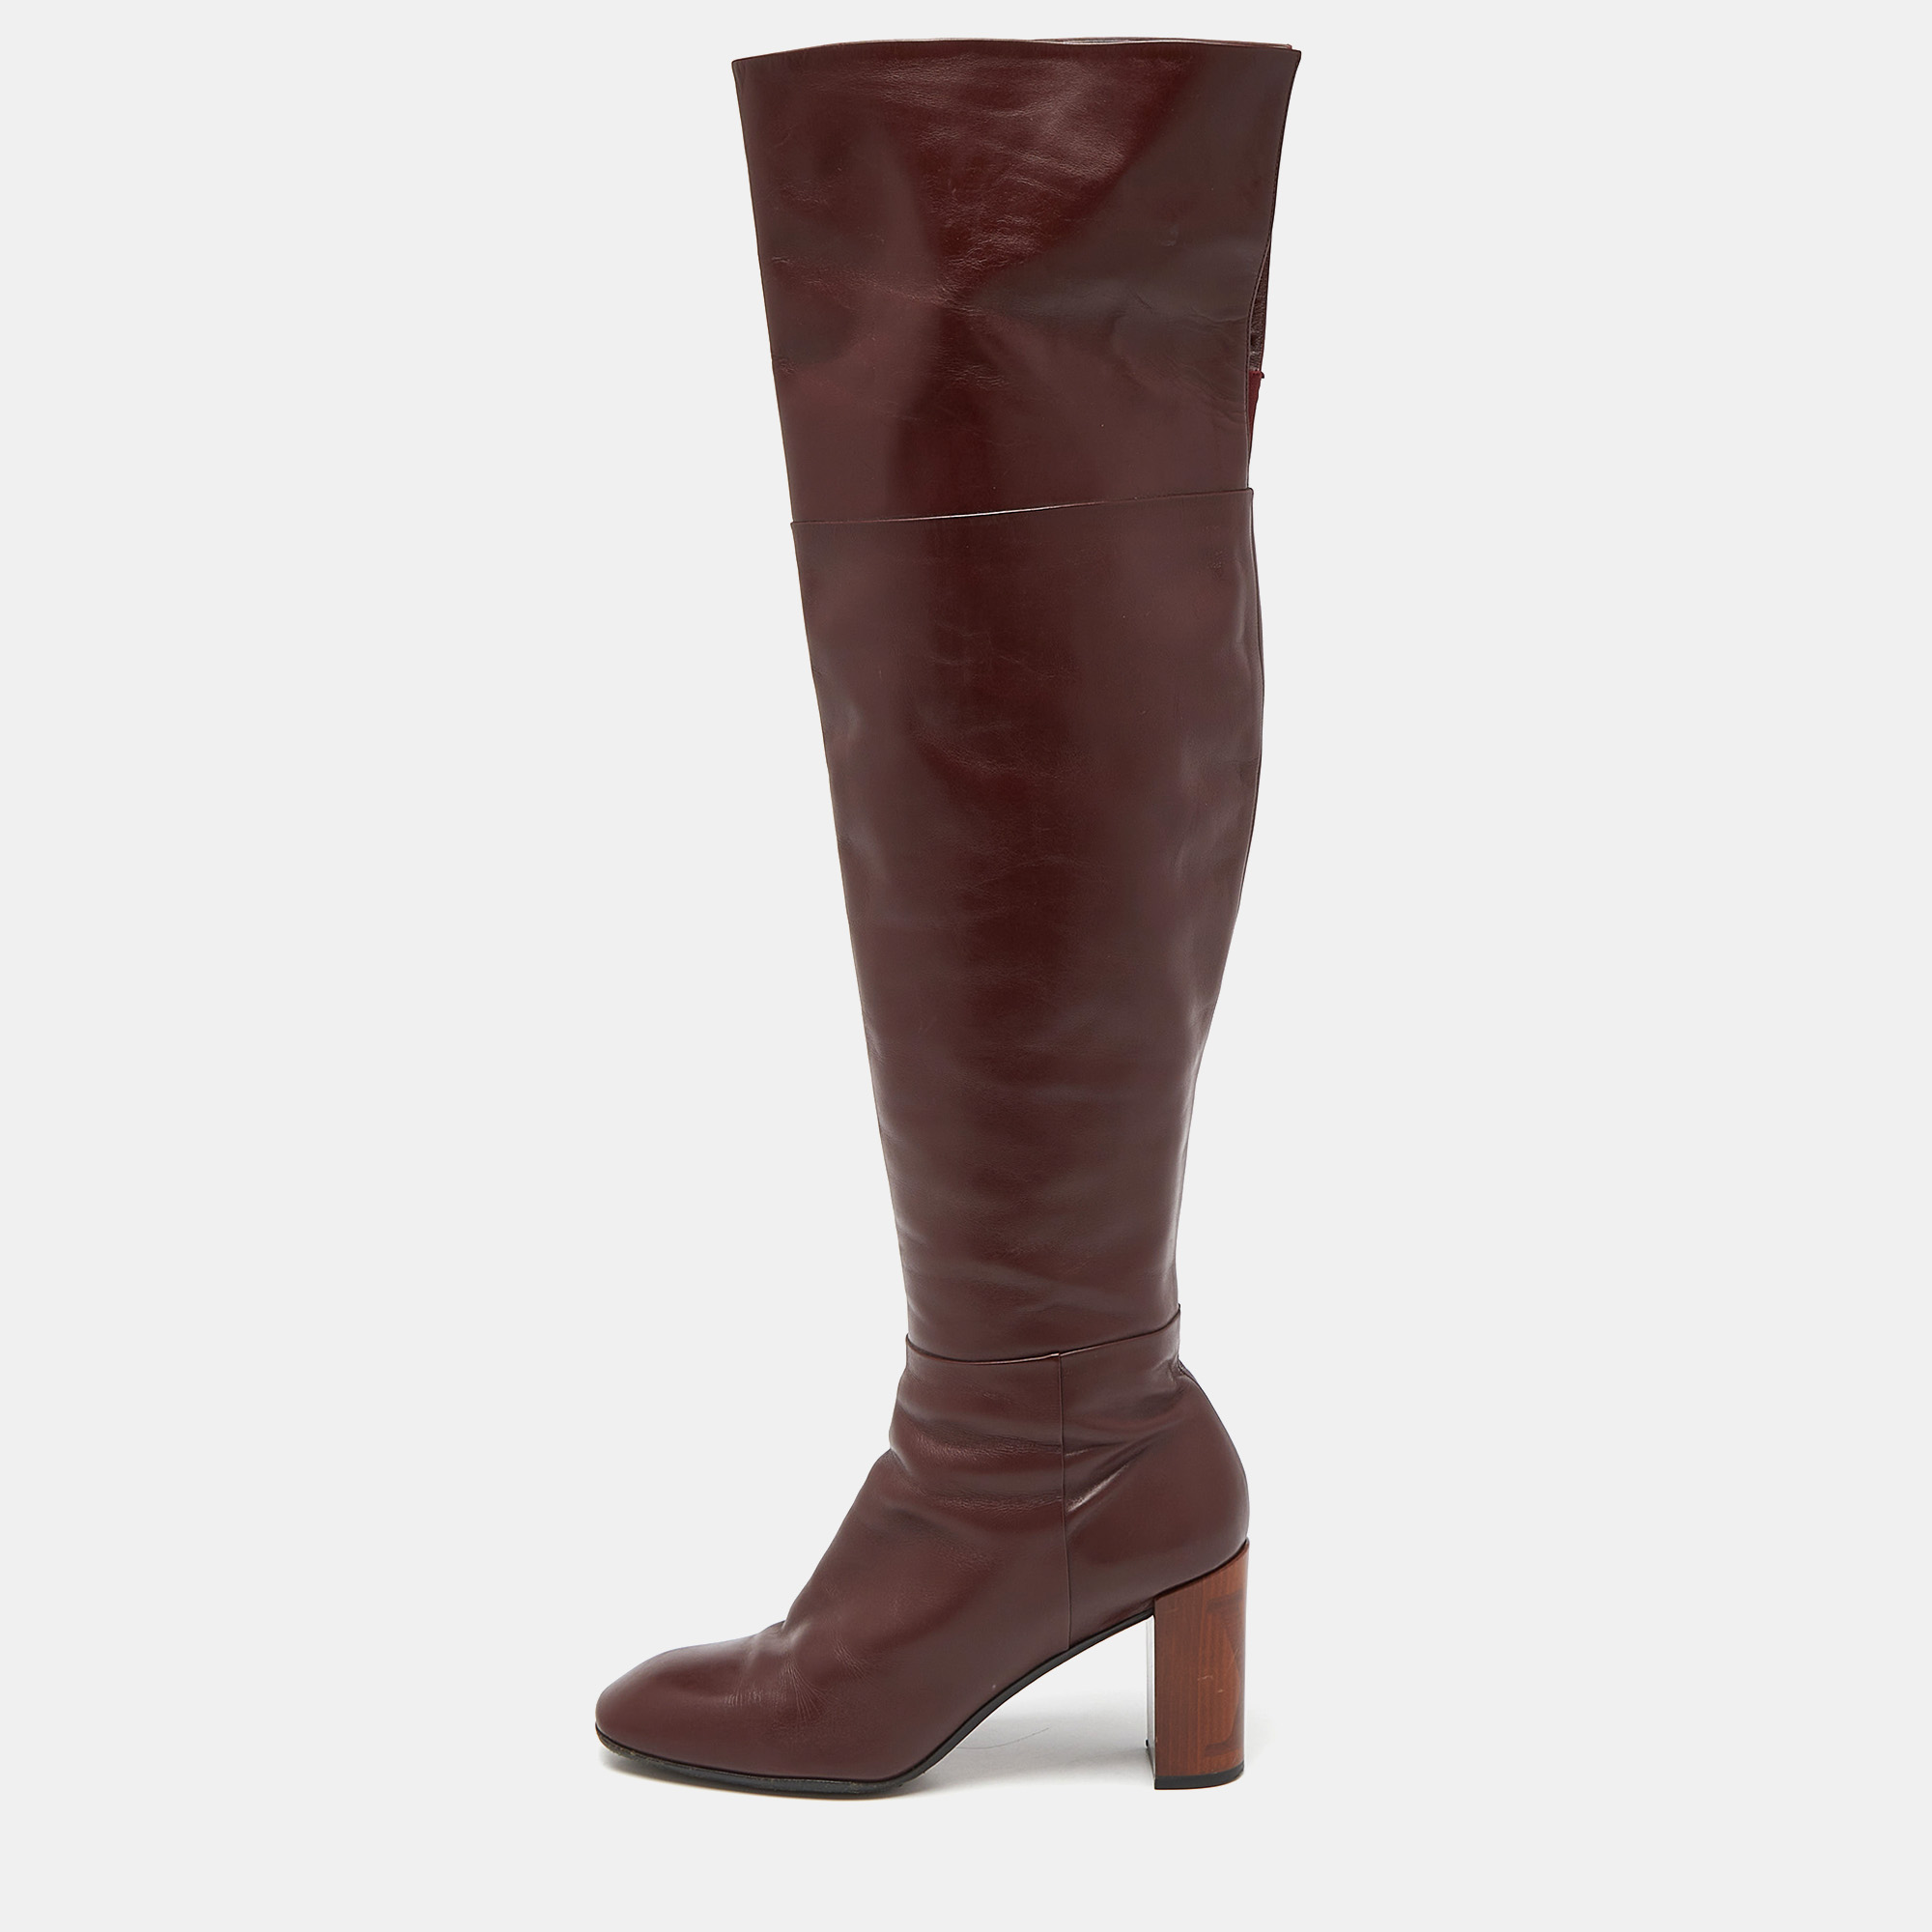 Louis vuitton burgundy leather over the knee length boots size 39